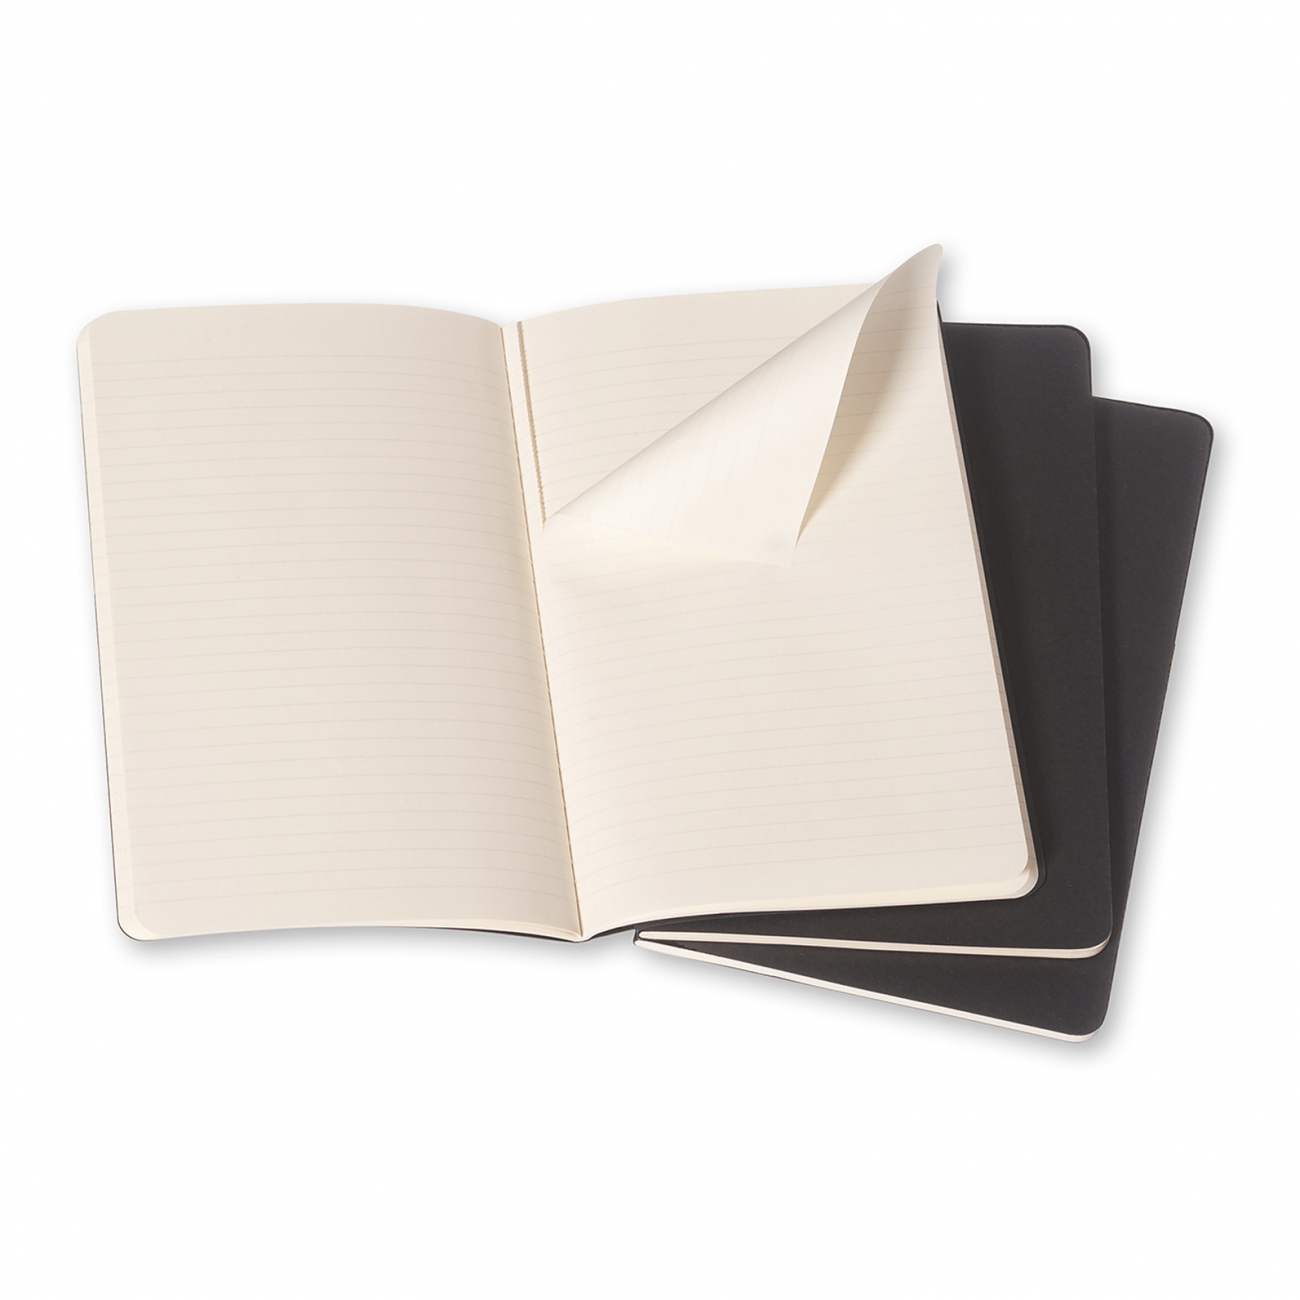 CAHIER NOTEBOOK - SET OF 3 - RULED - LARGE - BLACK